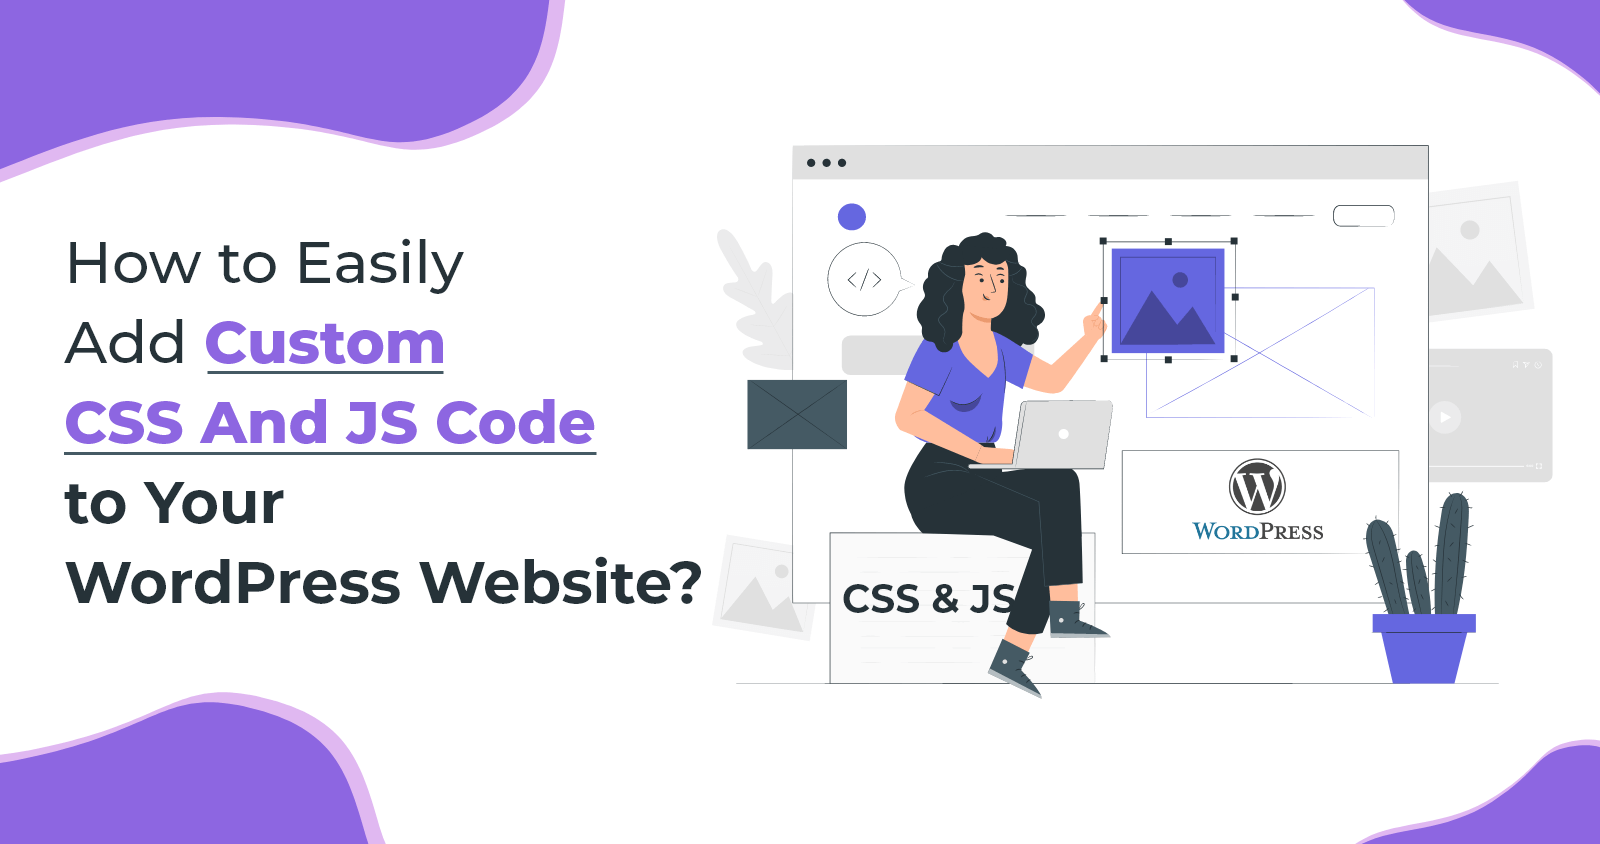 How to Easily Add Custom CSS And JS Code to Your WordPress Website